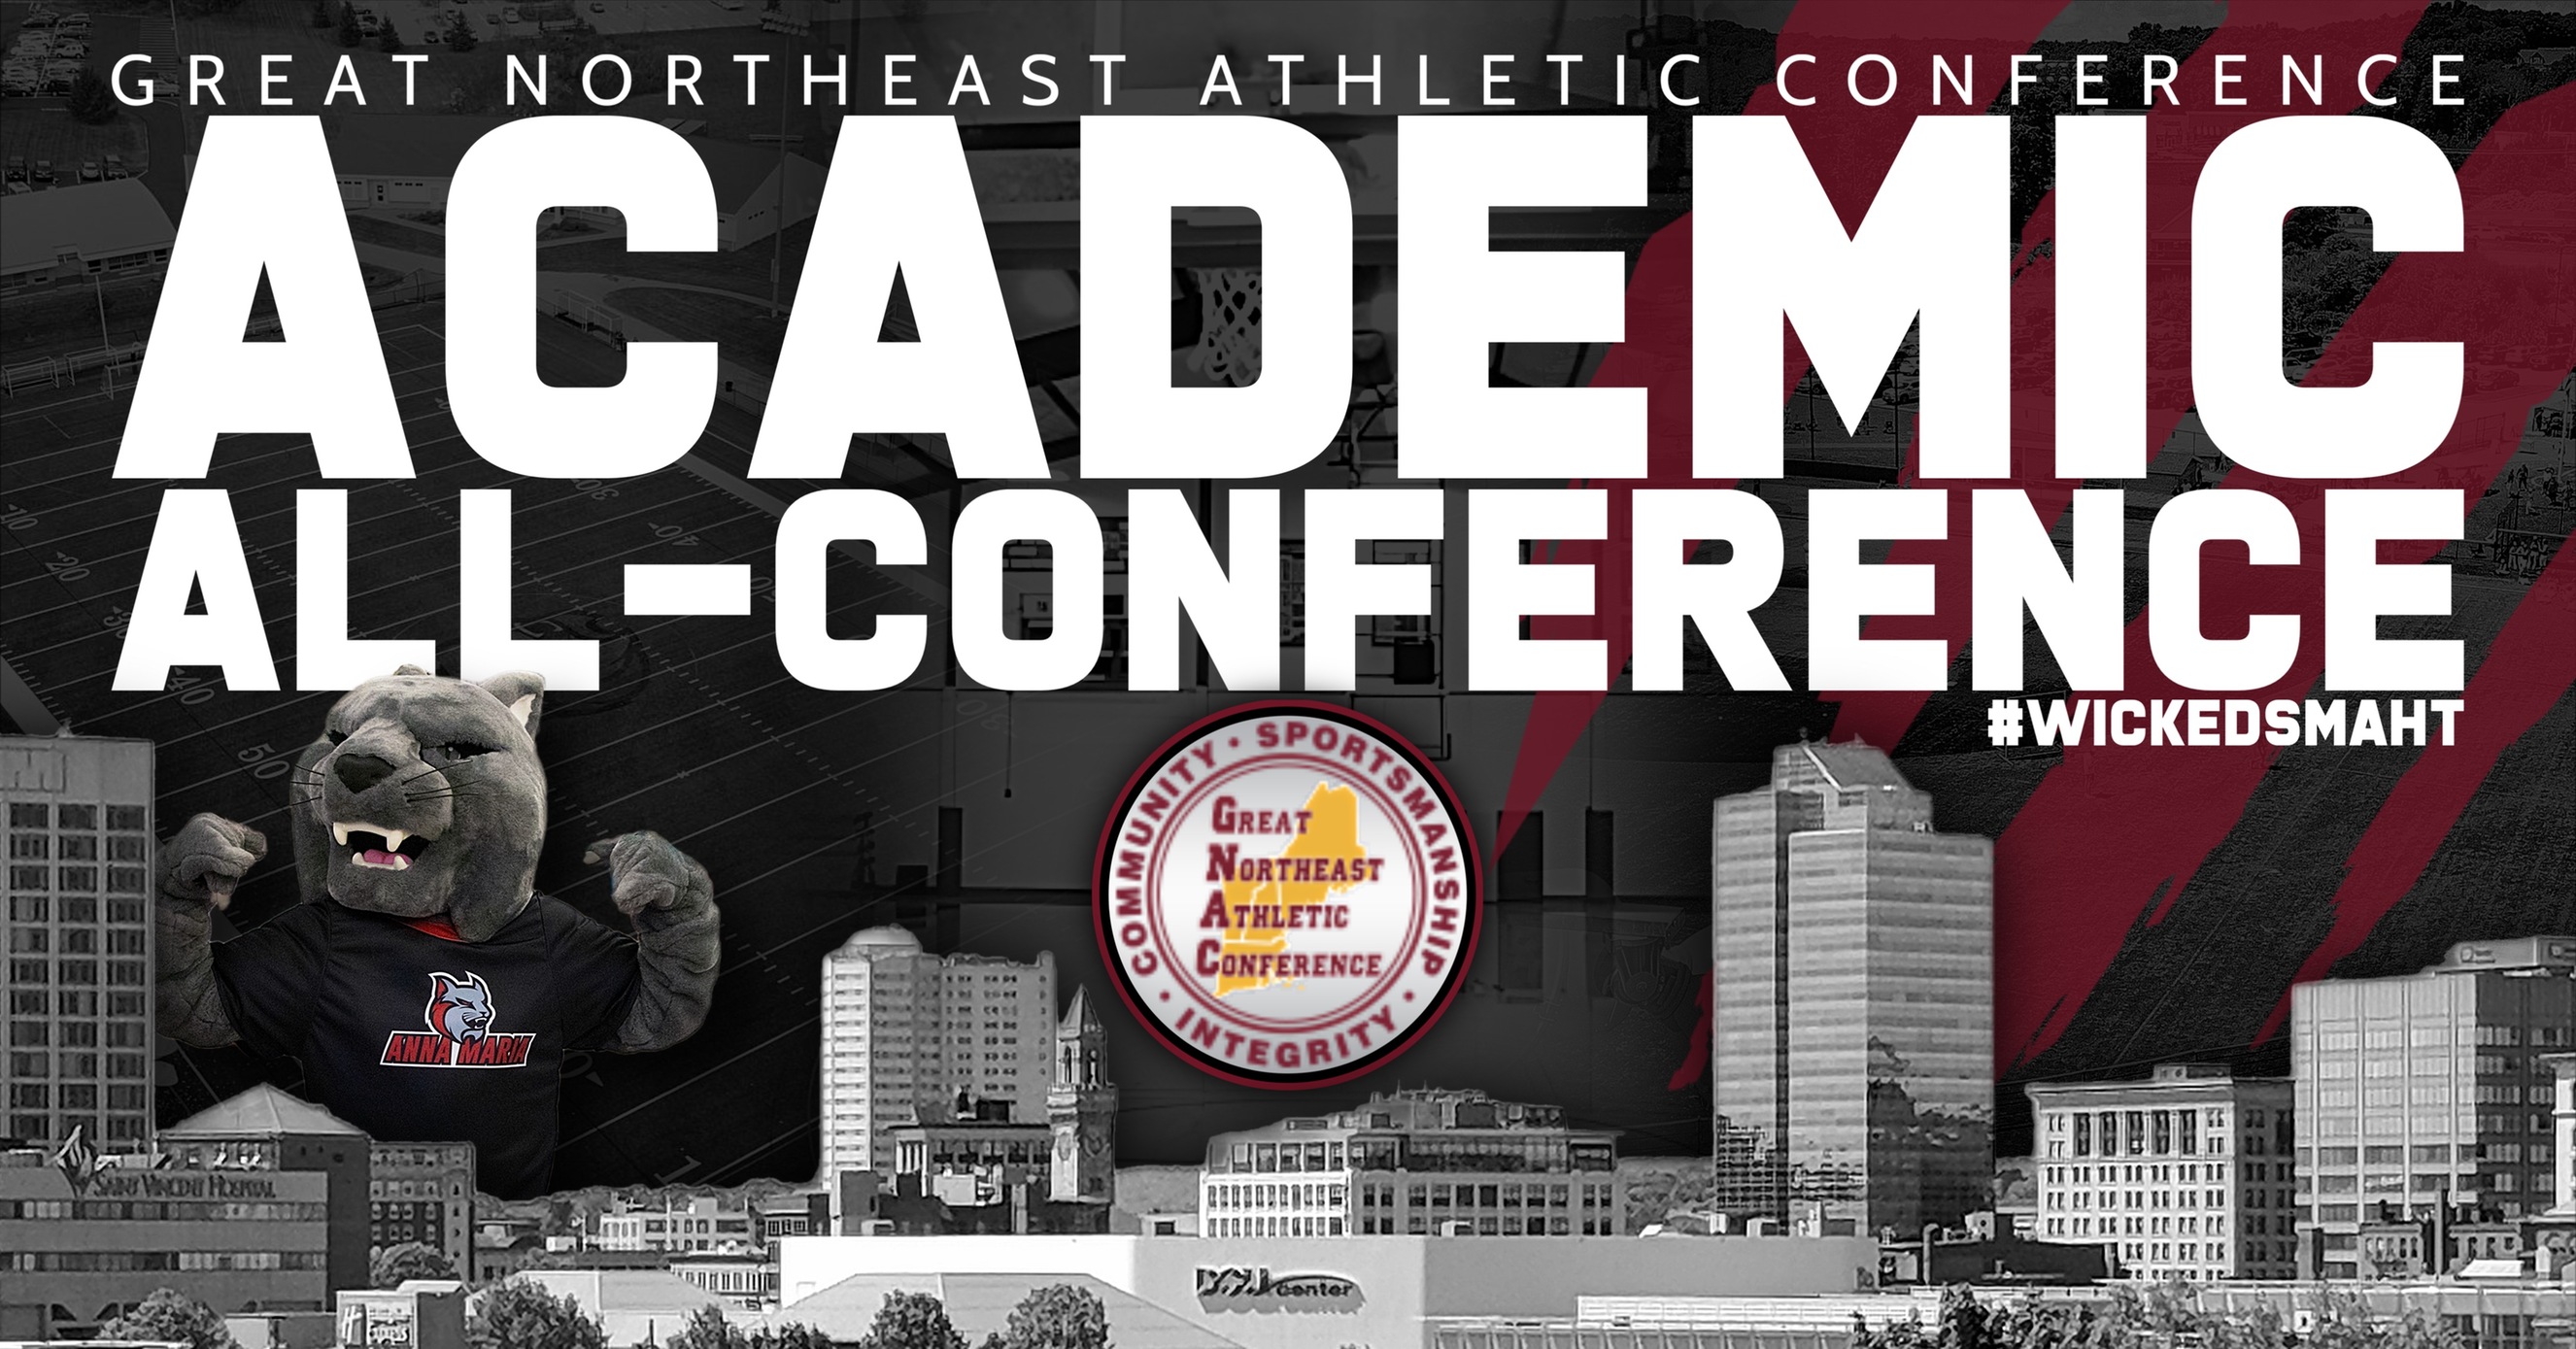 69 AMCATS Named To The GNAC Academic All-Conference Team